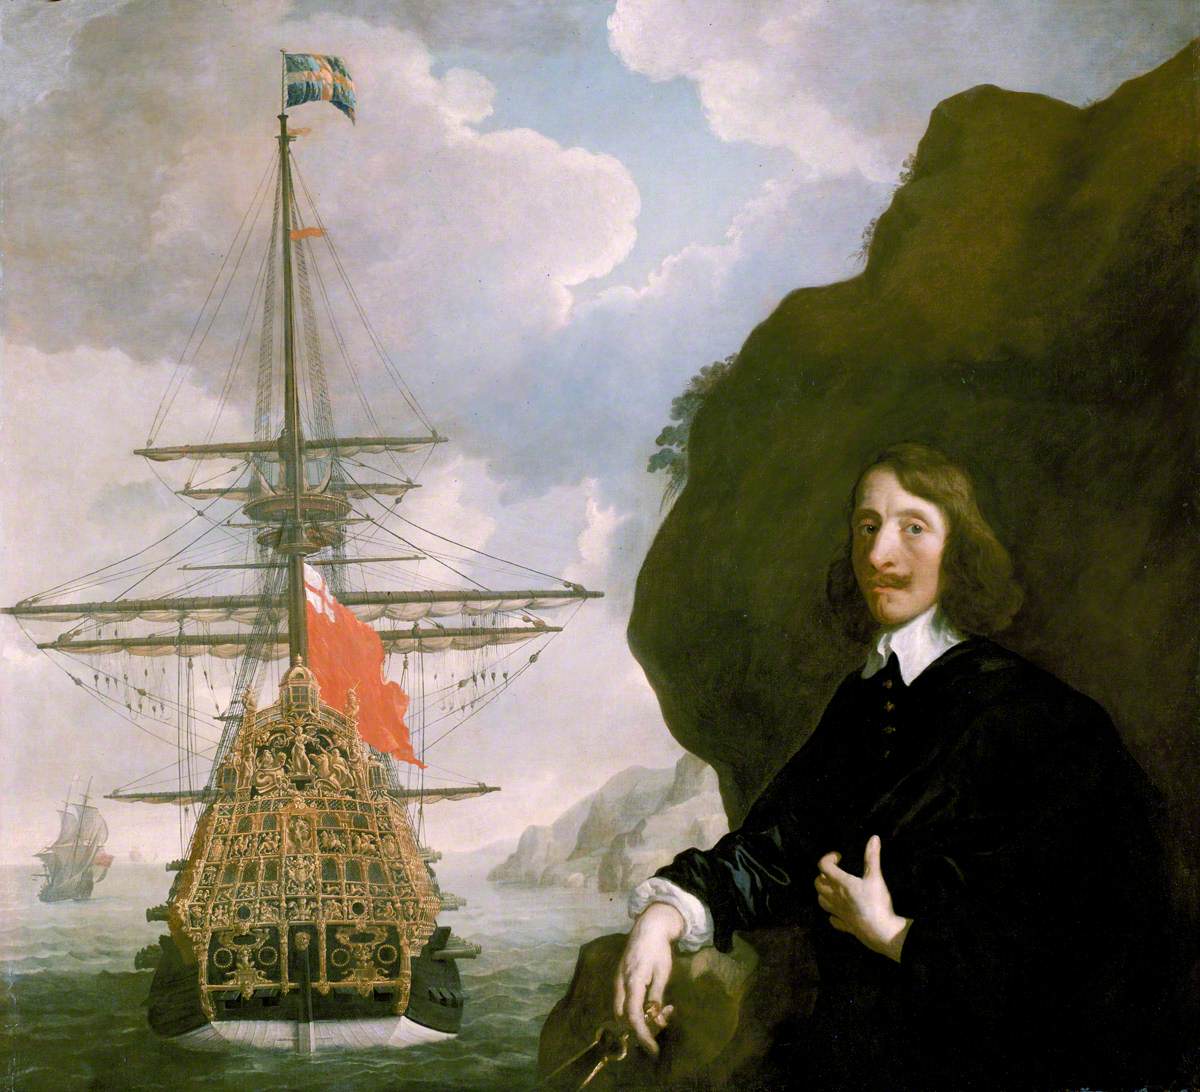 Peter Pett and the 'Sovereign of the Seas'